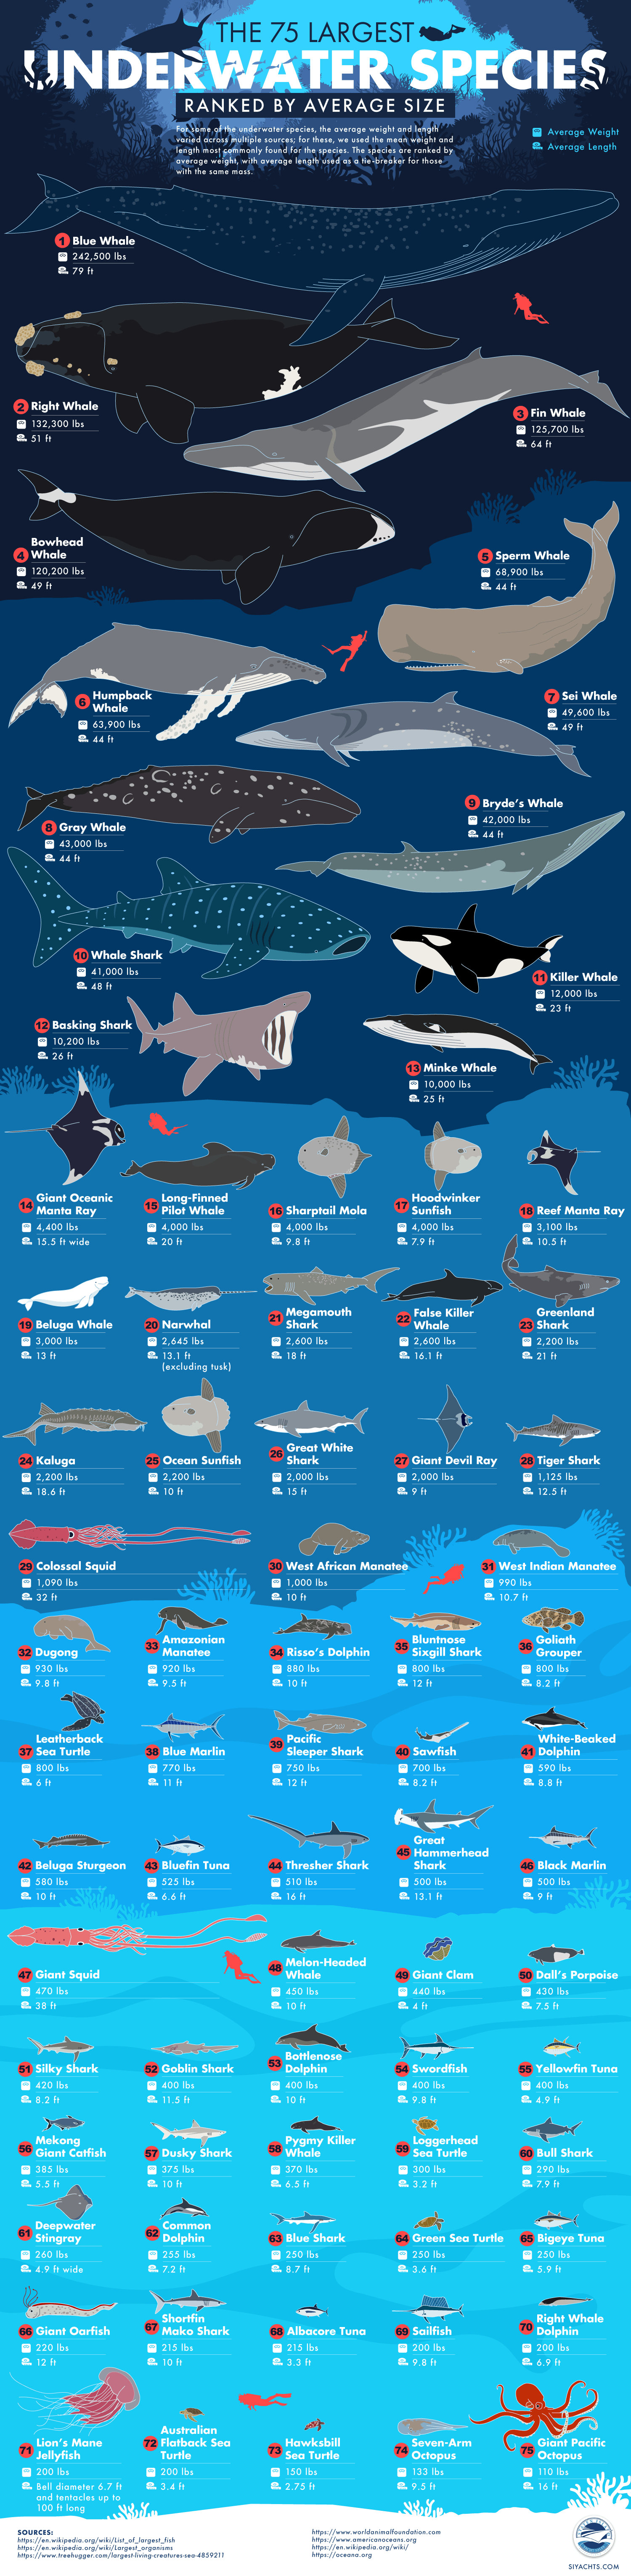 The 75 Largest Underwater Species in the World, Ranked by Weight